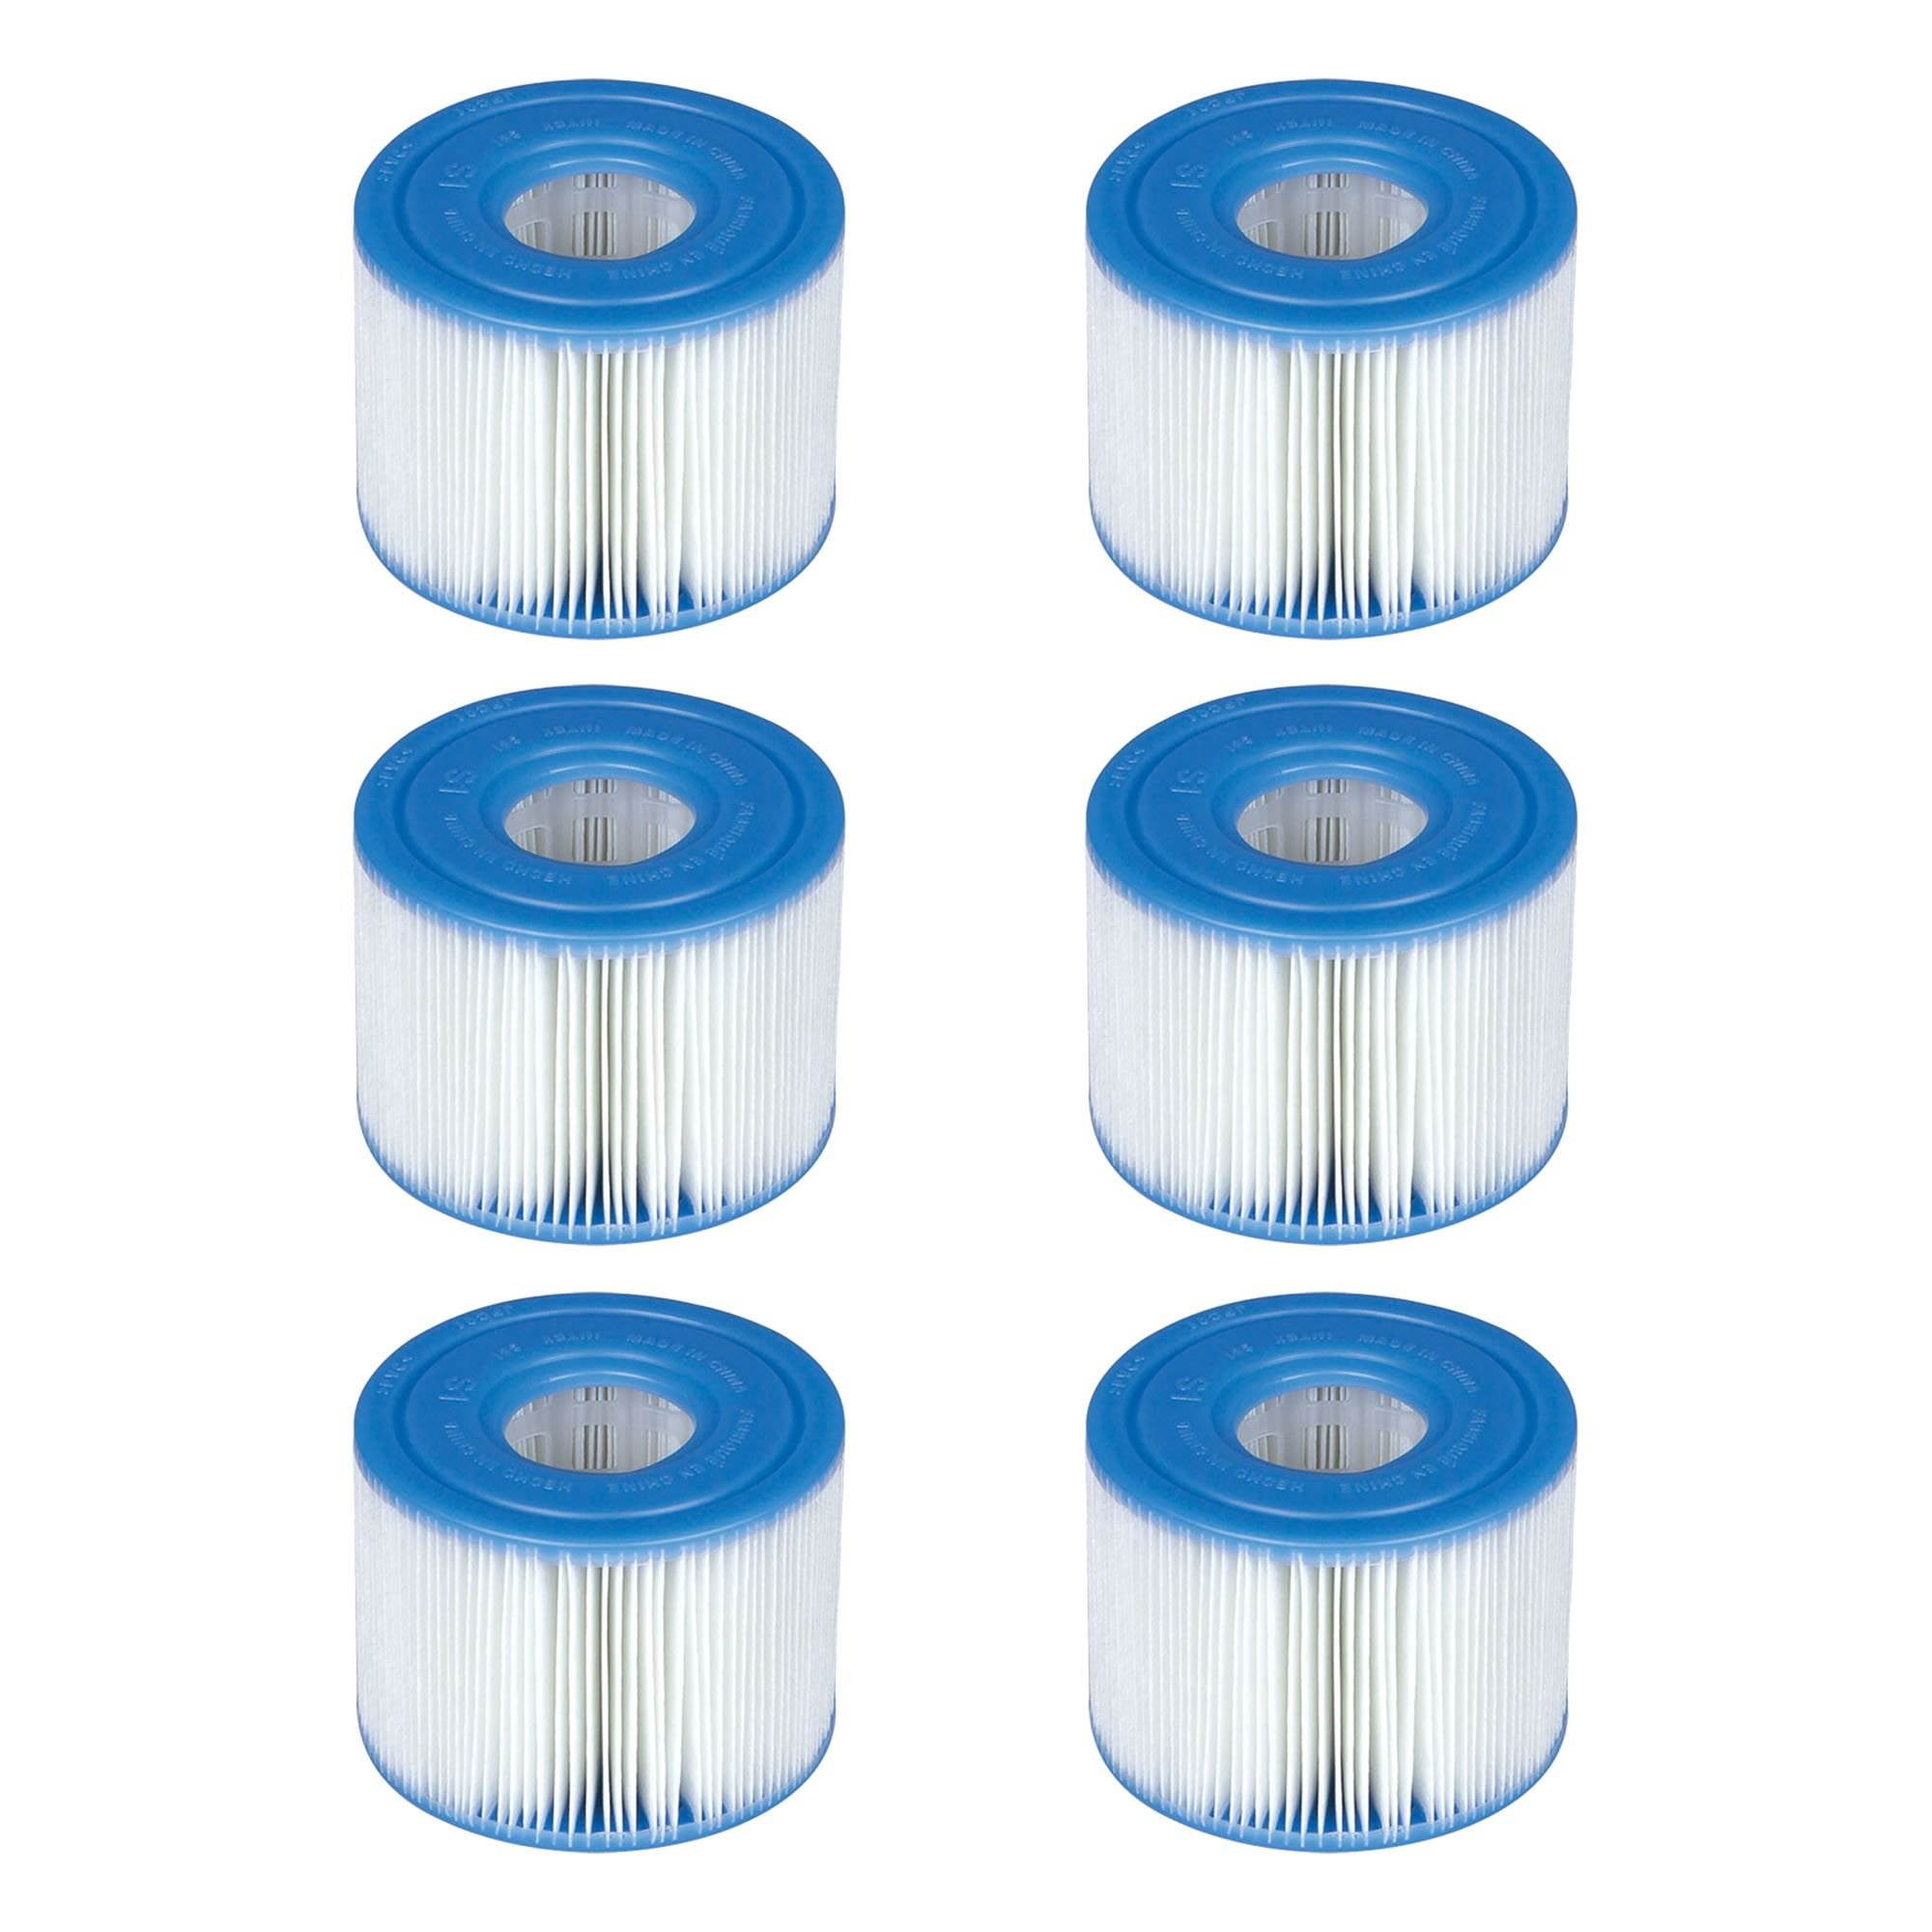 Intex 29007E Type H Easy Set Filter Cartridge Replacement for Swimming Pools 